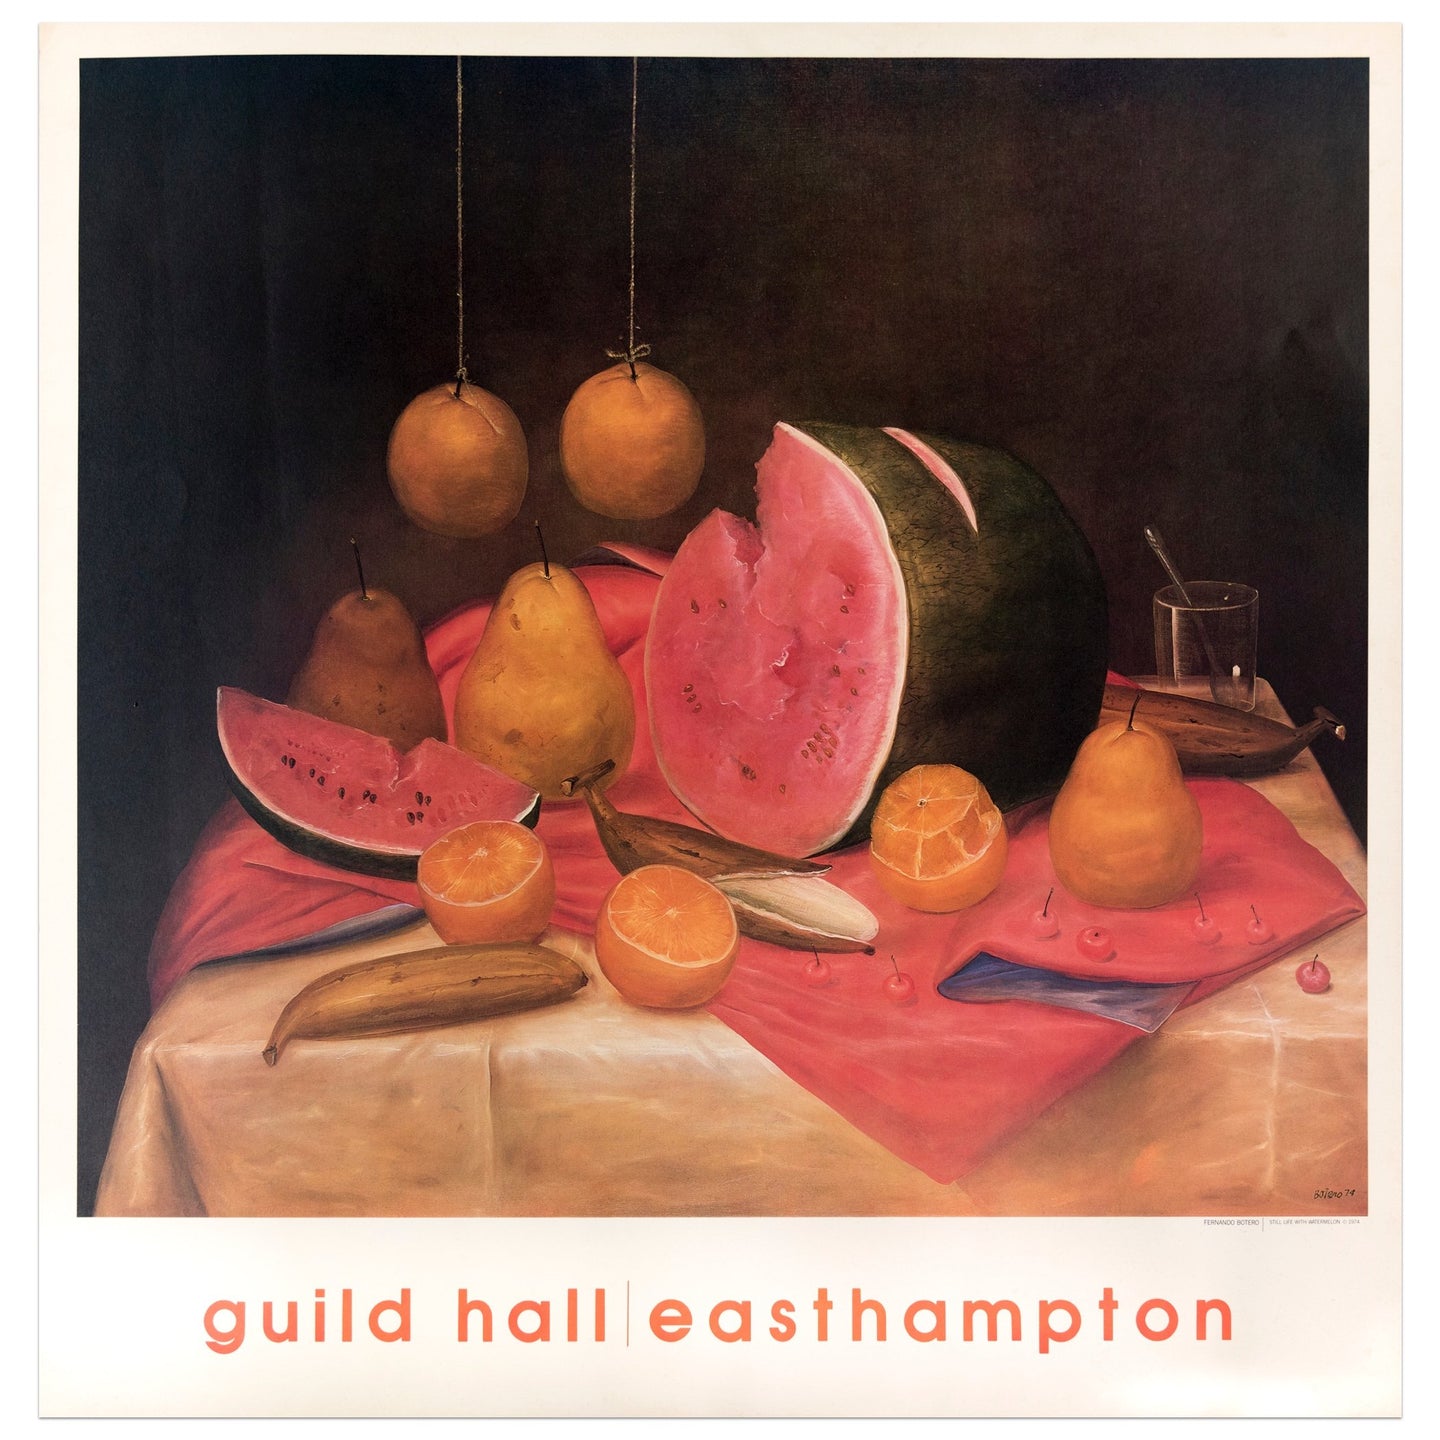 Guild Hall poster of a still life fruit scene featuring a sliced watermelon, pears, oranges, and bananas